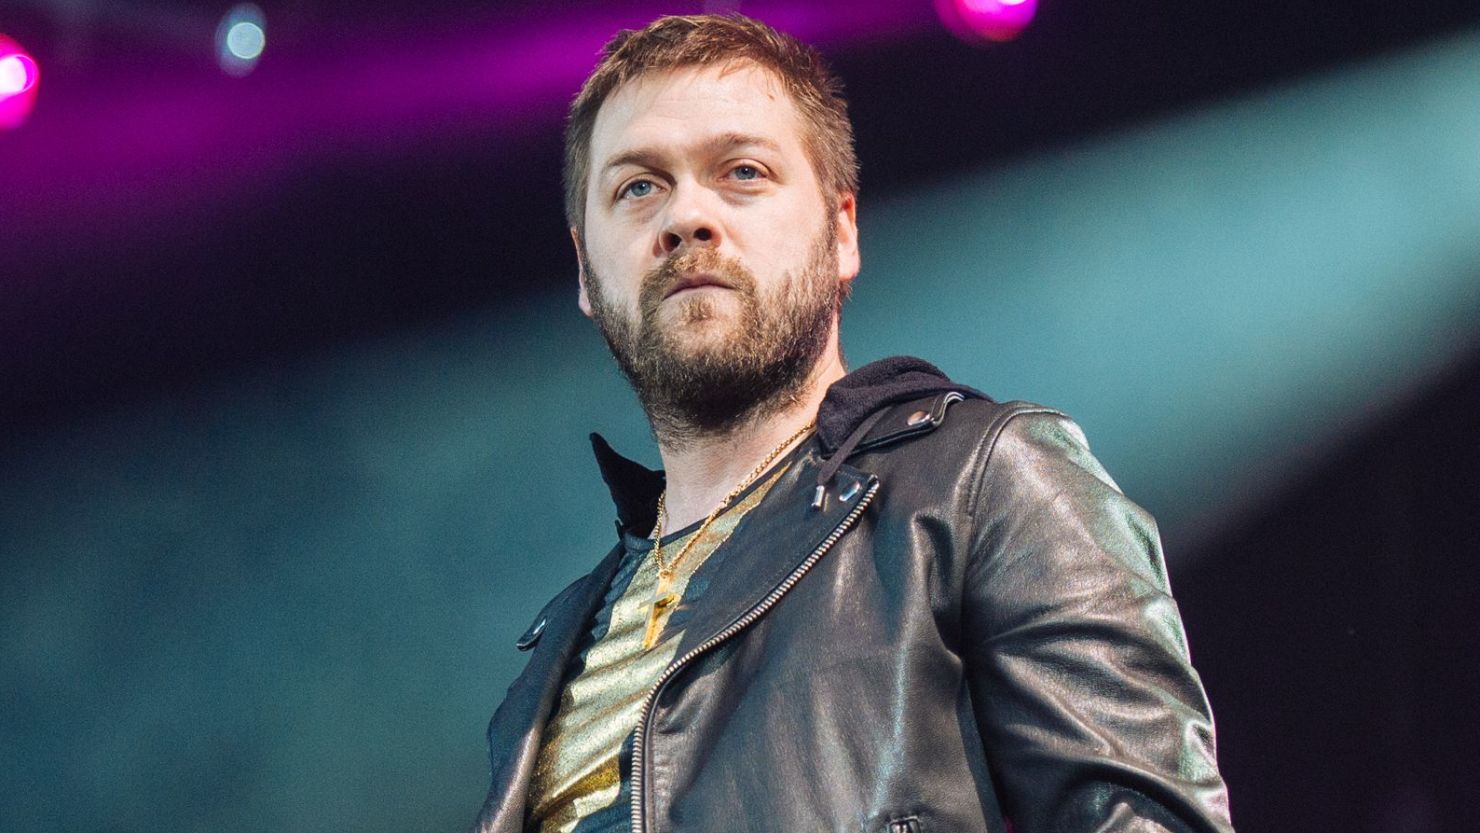 Kasabian frontman Tom Meighan has quit the band.